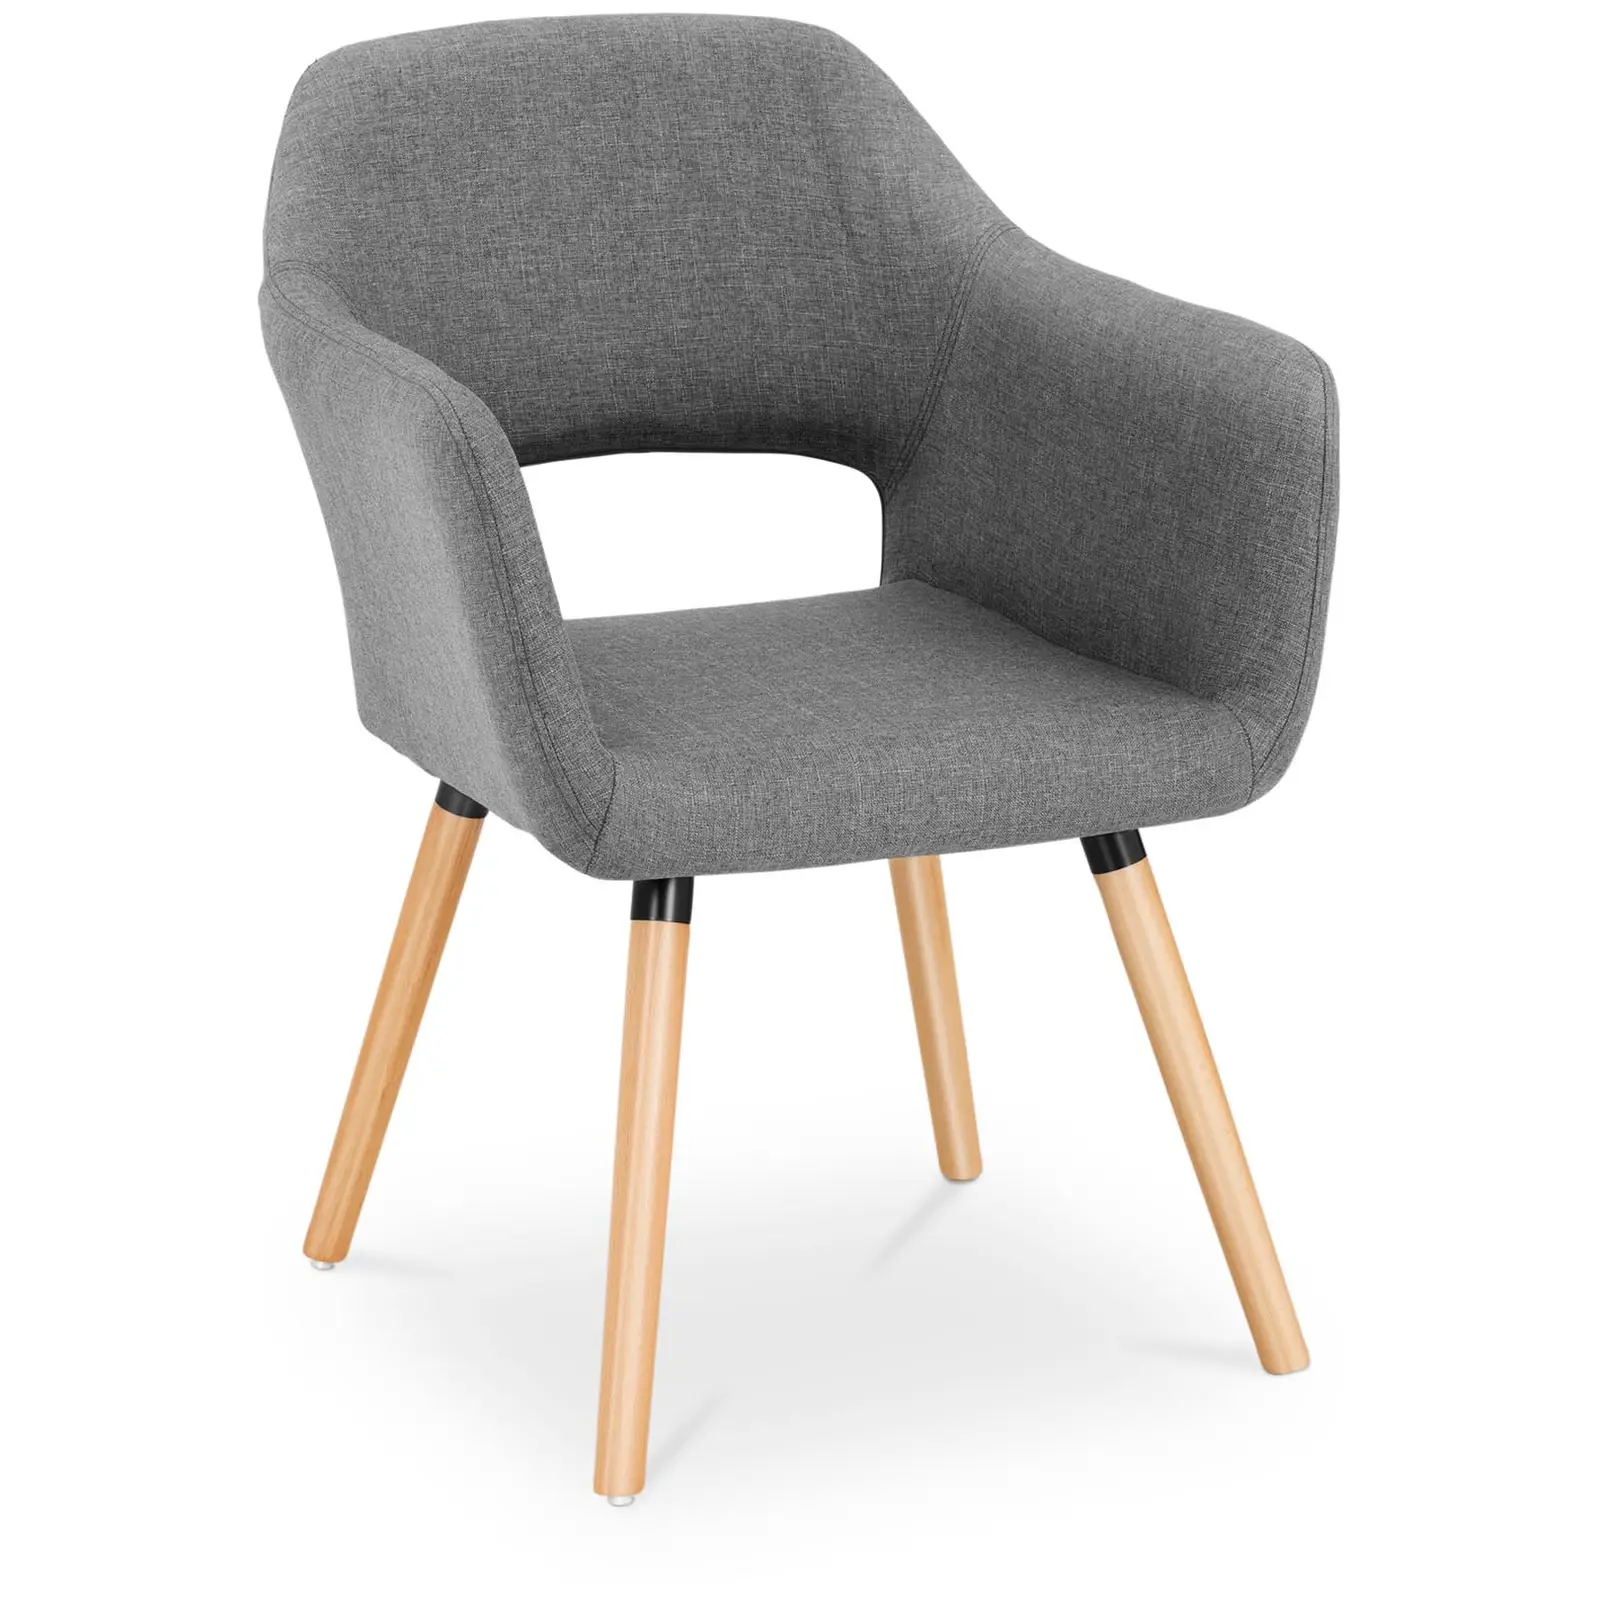 Cushioned Chair - up to 160 kg - seat 42 x 47 cm - grey